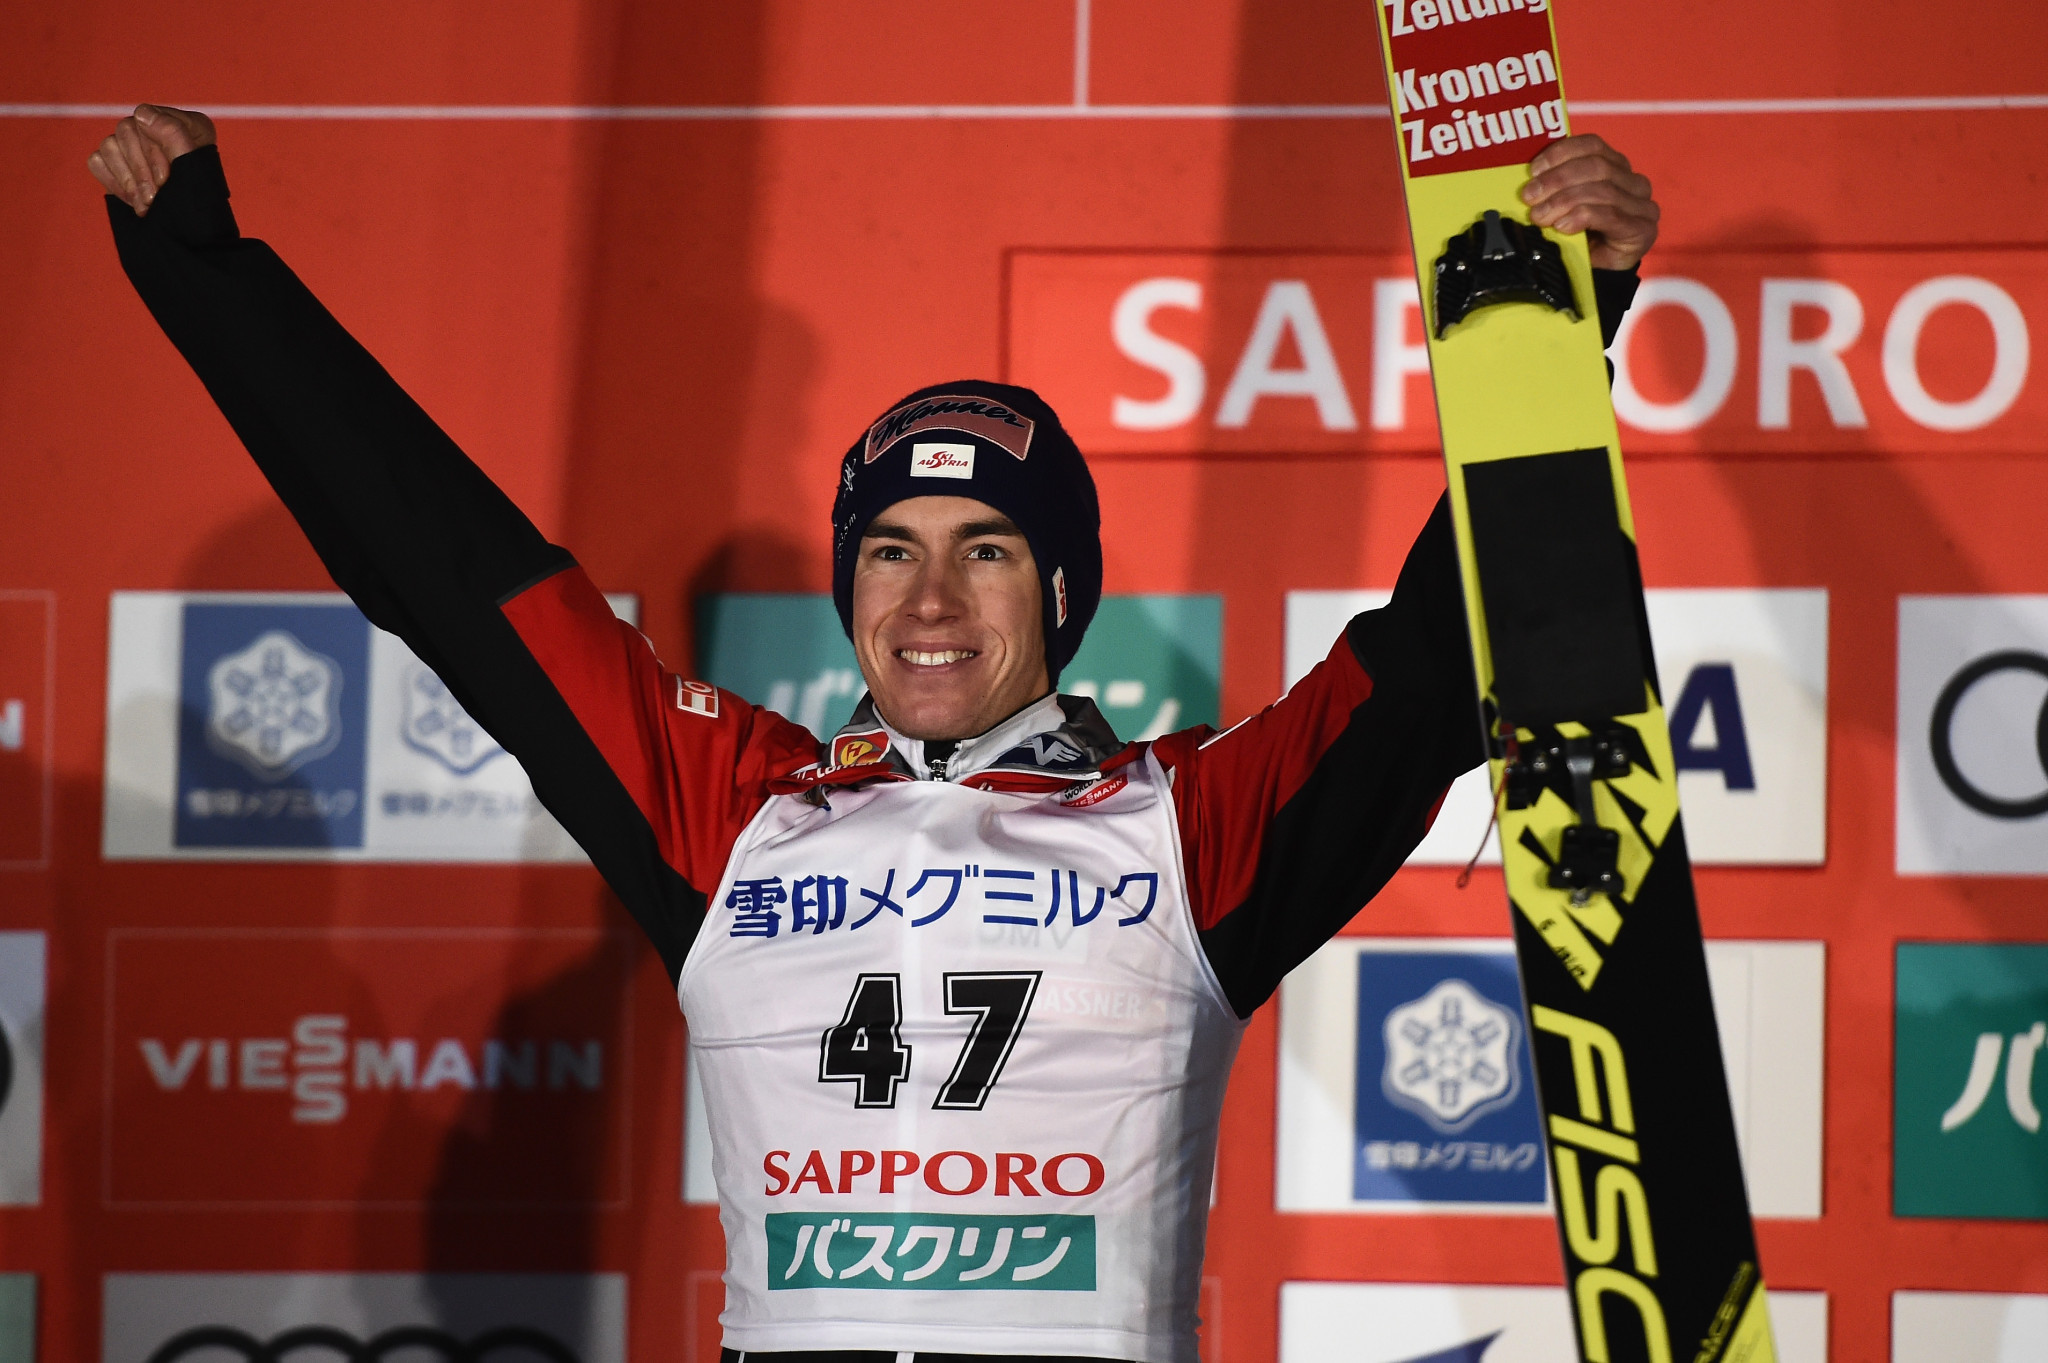 Stefan Kraft won the FIS Ski Jumping World Cup  in Sapporo ahead of Kamil Stoch who set a hill record with his last jump ©Getty Images